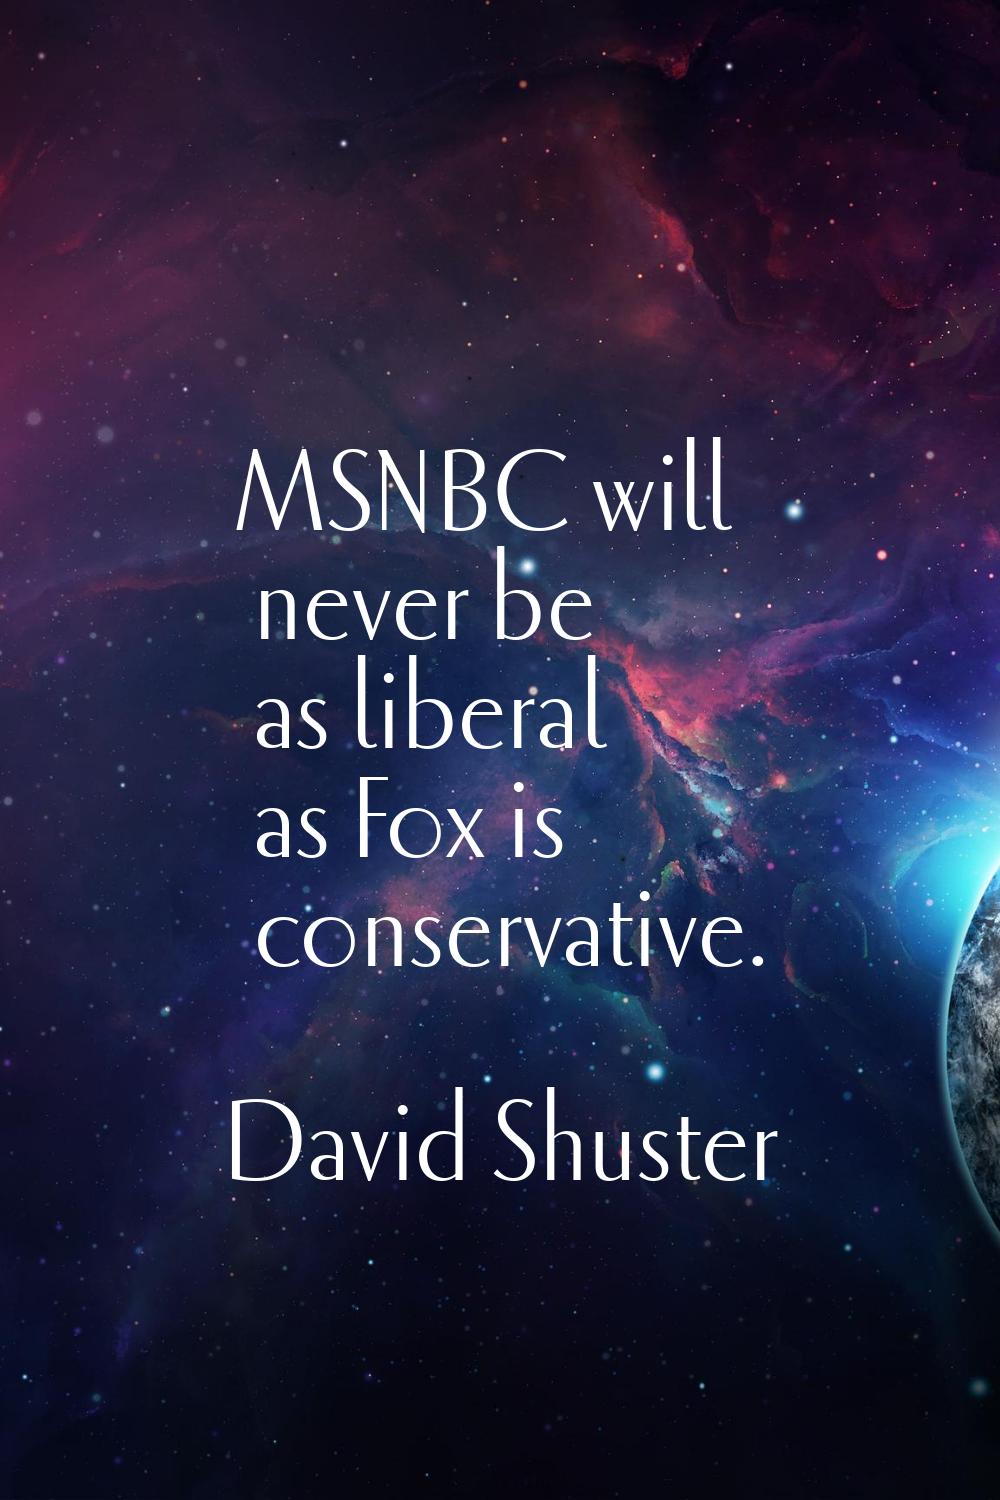 MSNBC will never be as liberal as Fox is conservative.